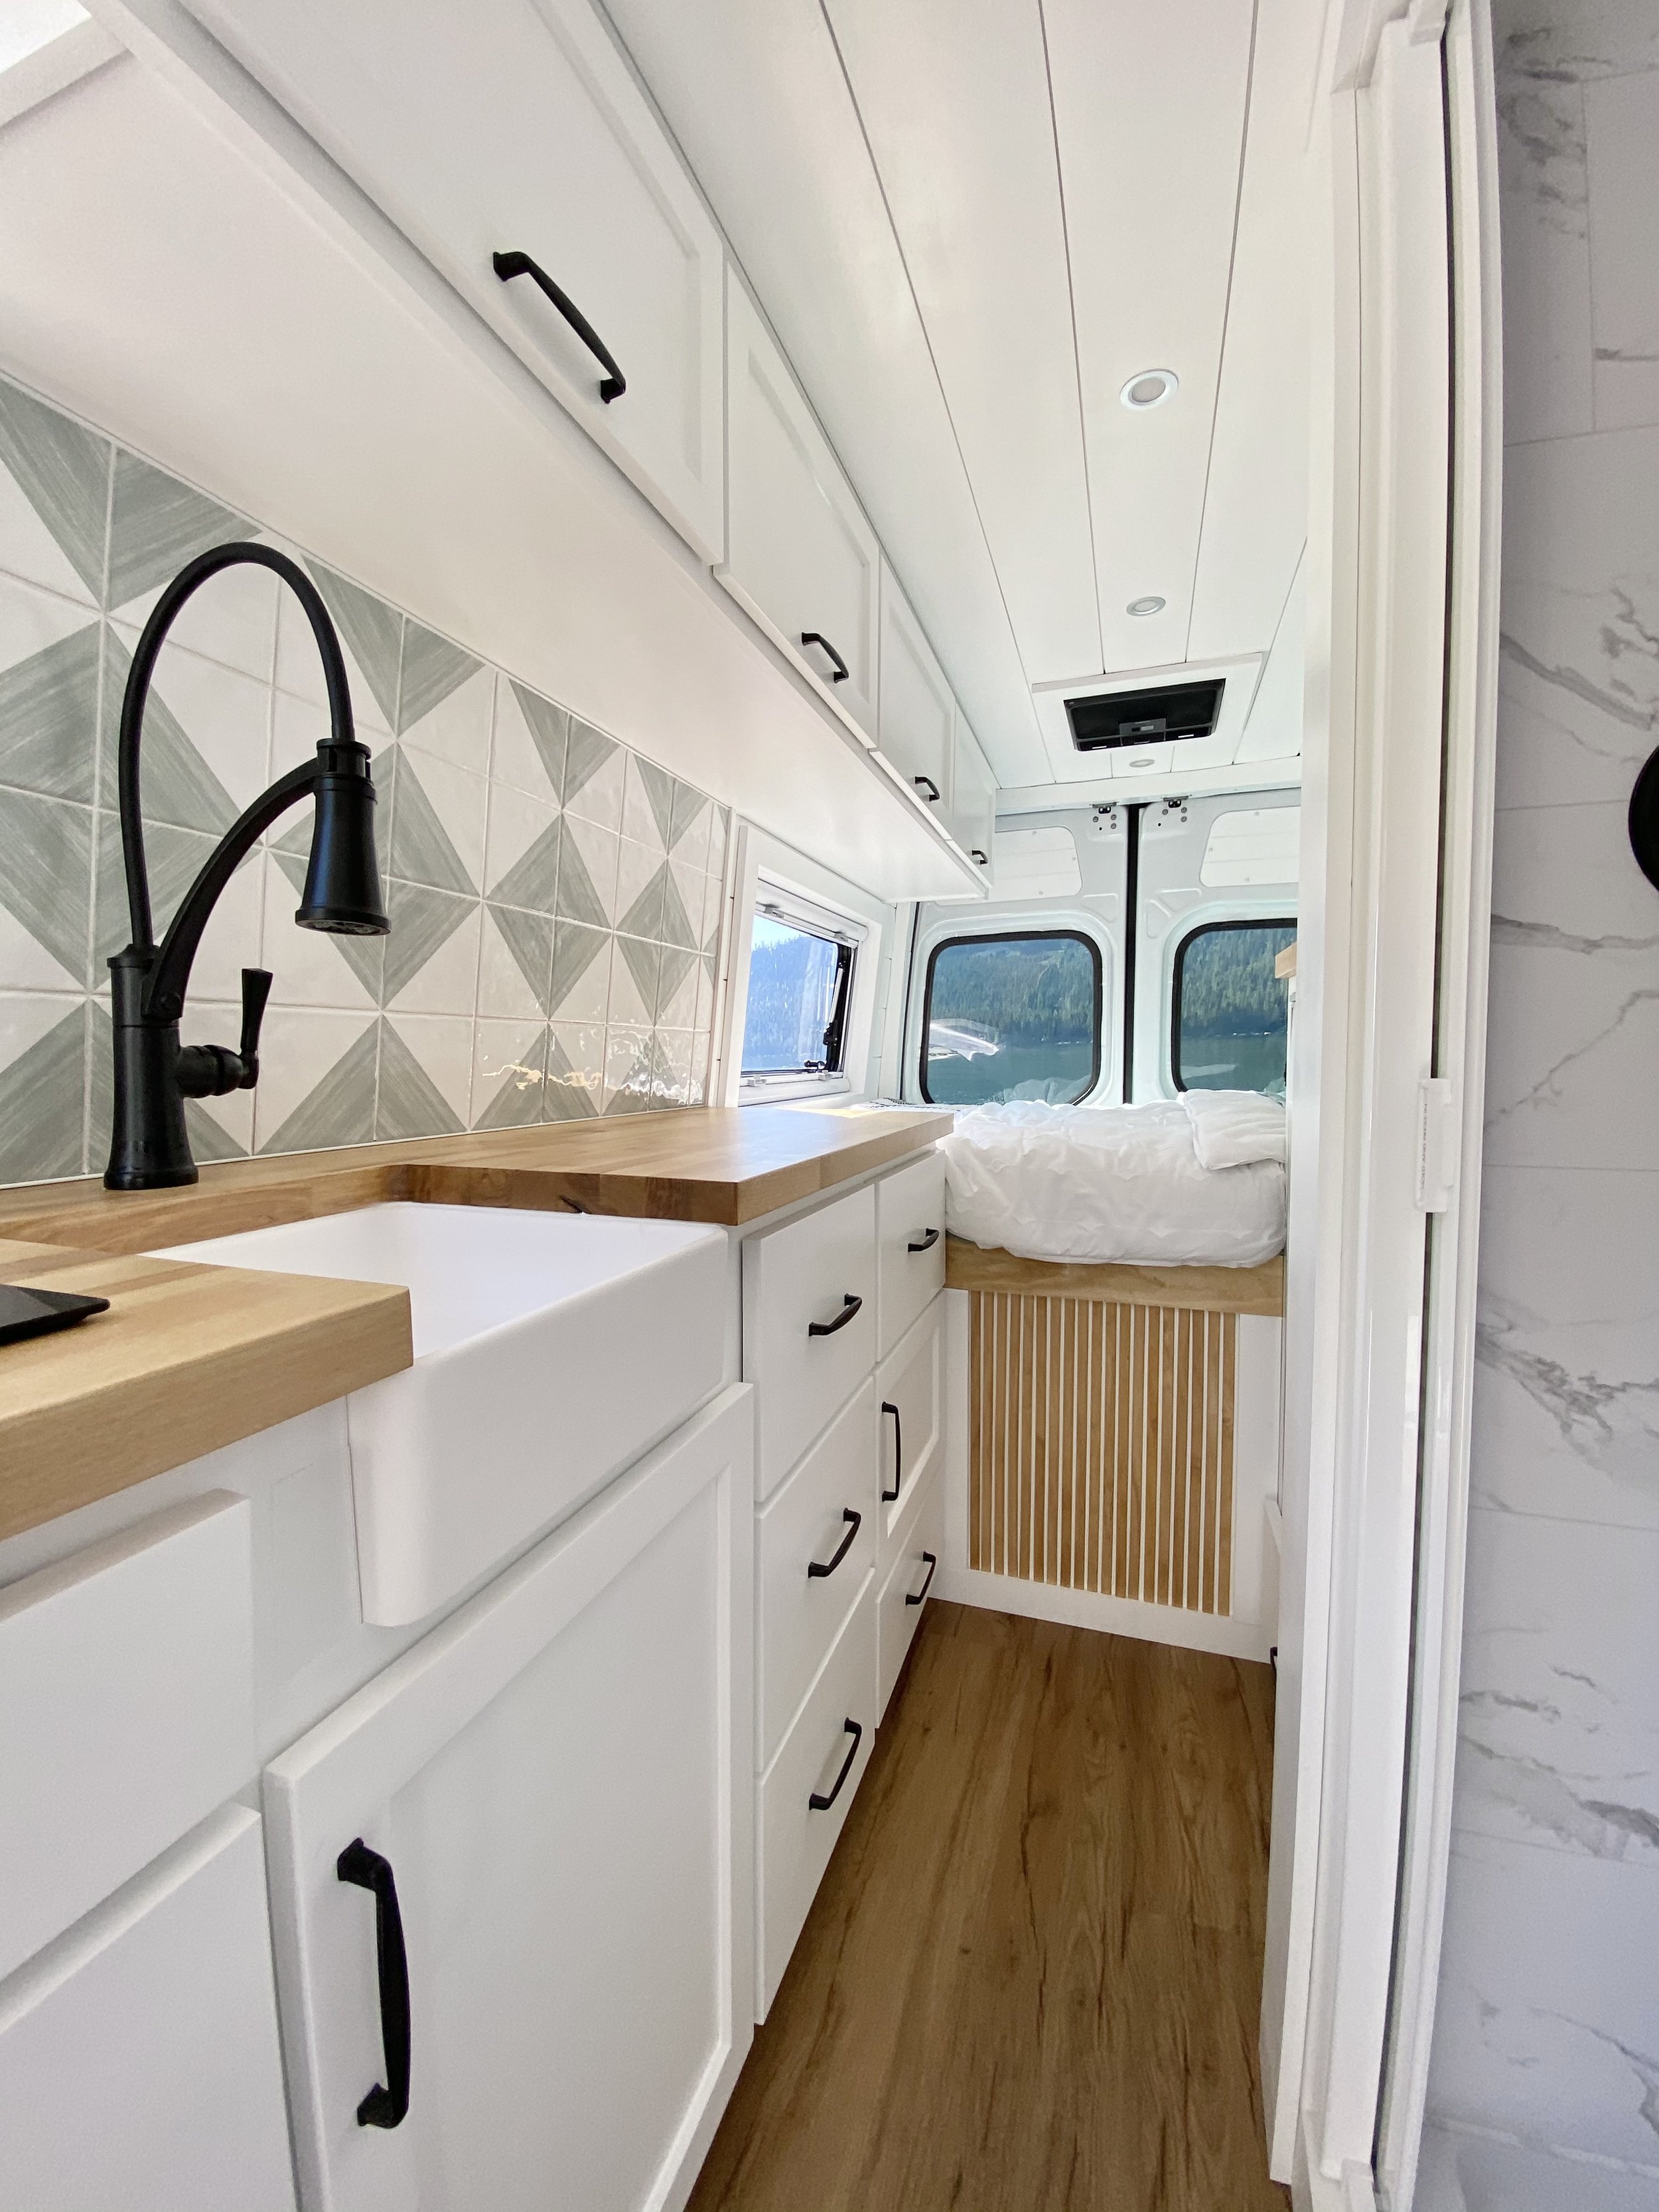 Custom Crafted Luxury Van Conversion for Family of 3 kitchen.jpg